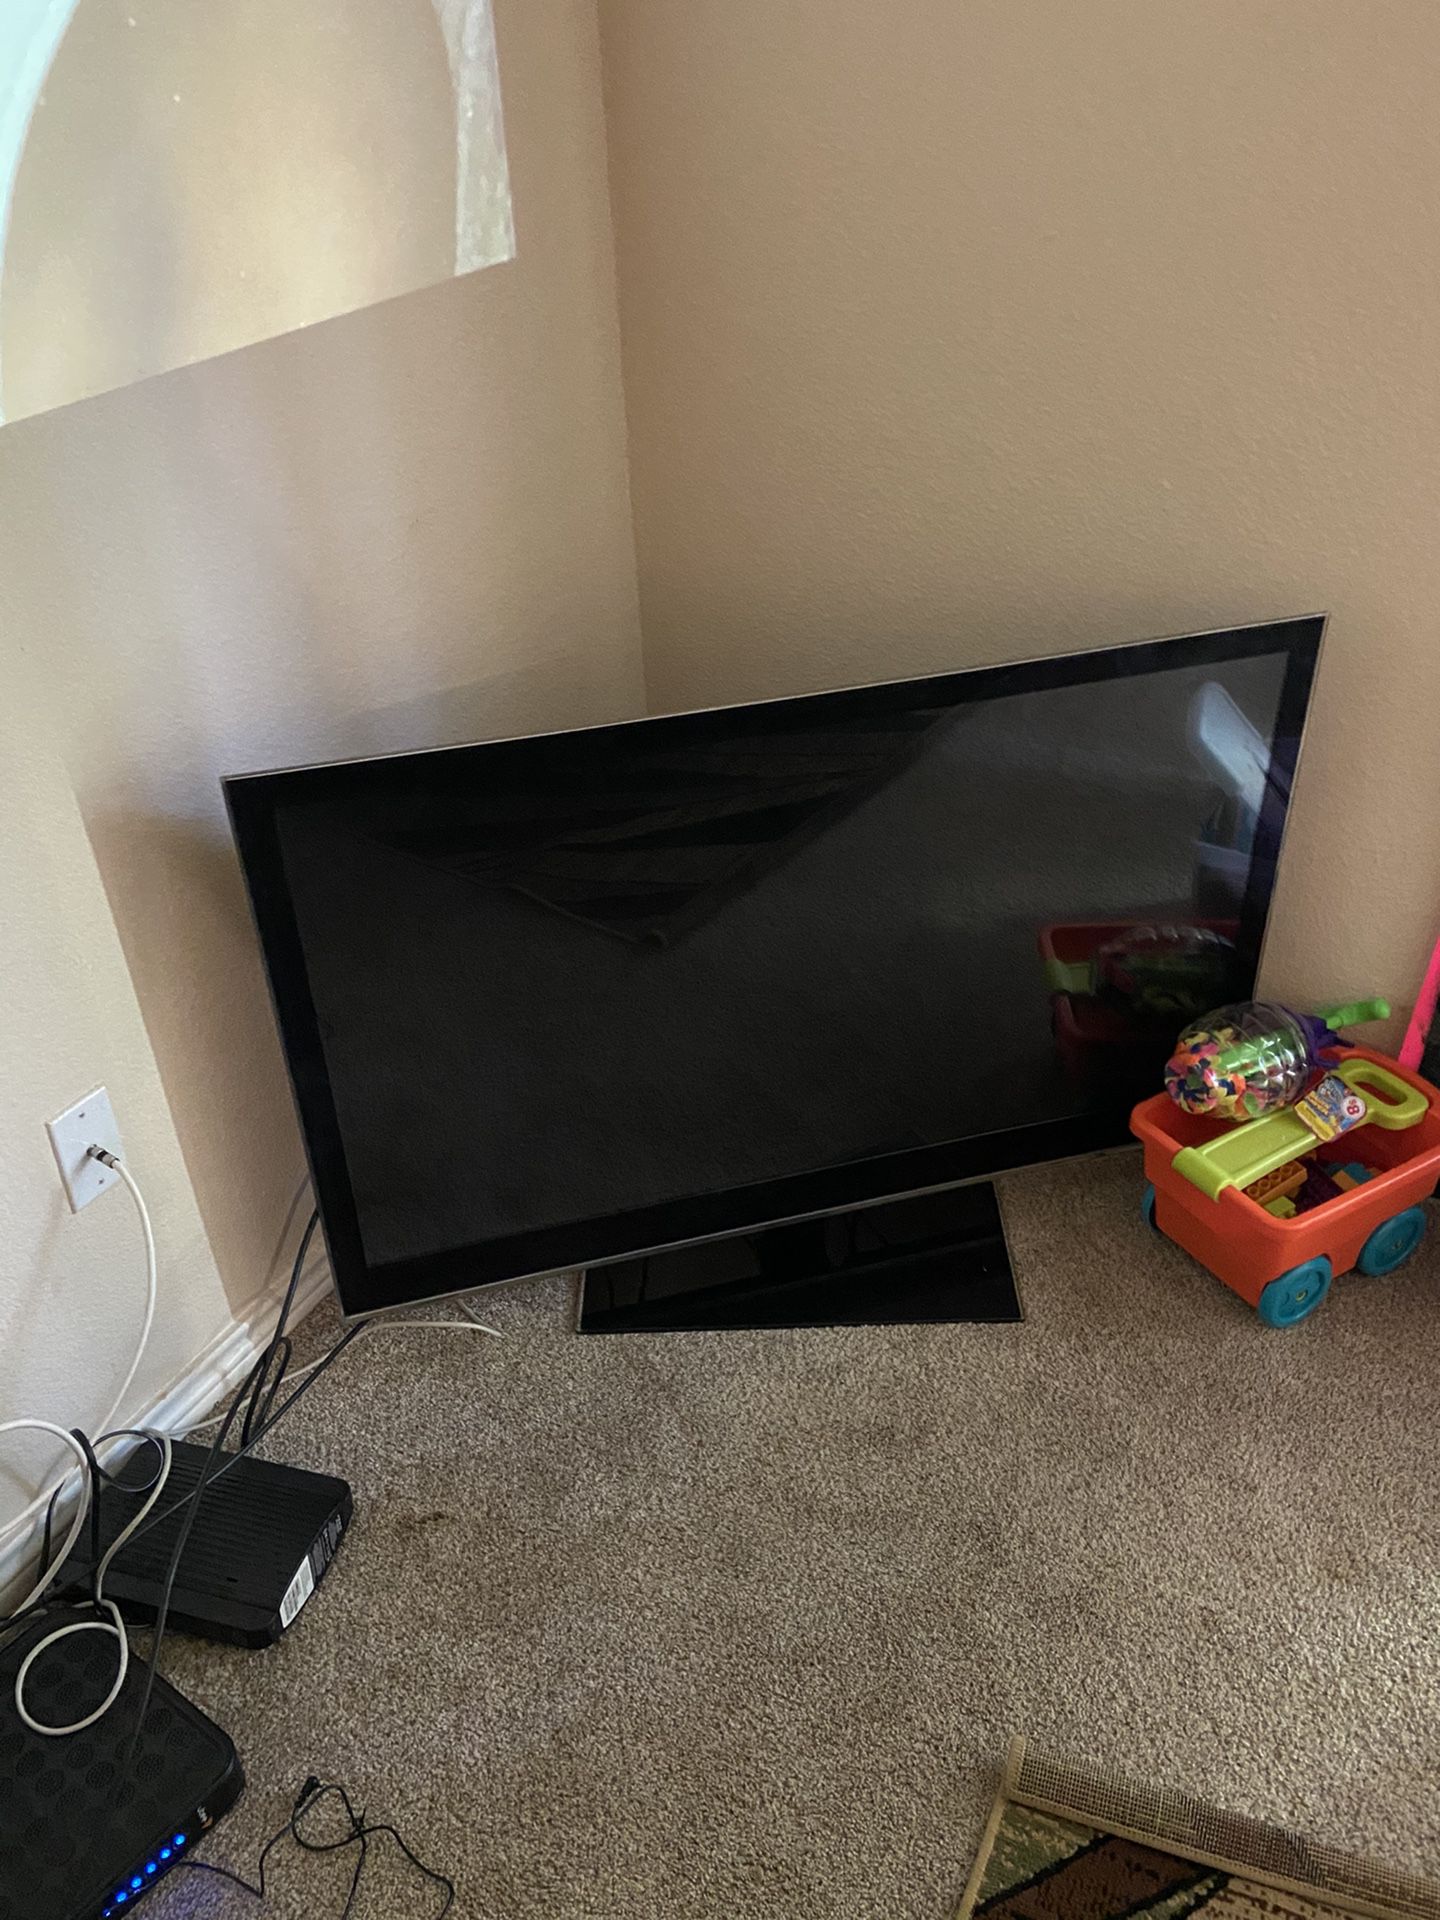 50” LG TV HDMI PORTS OUT